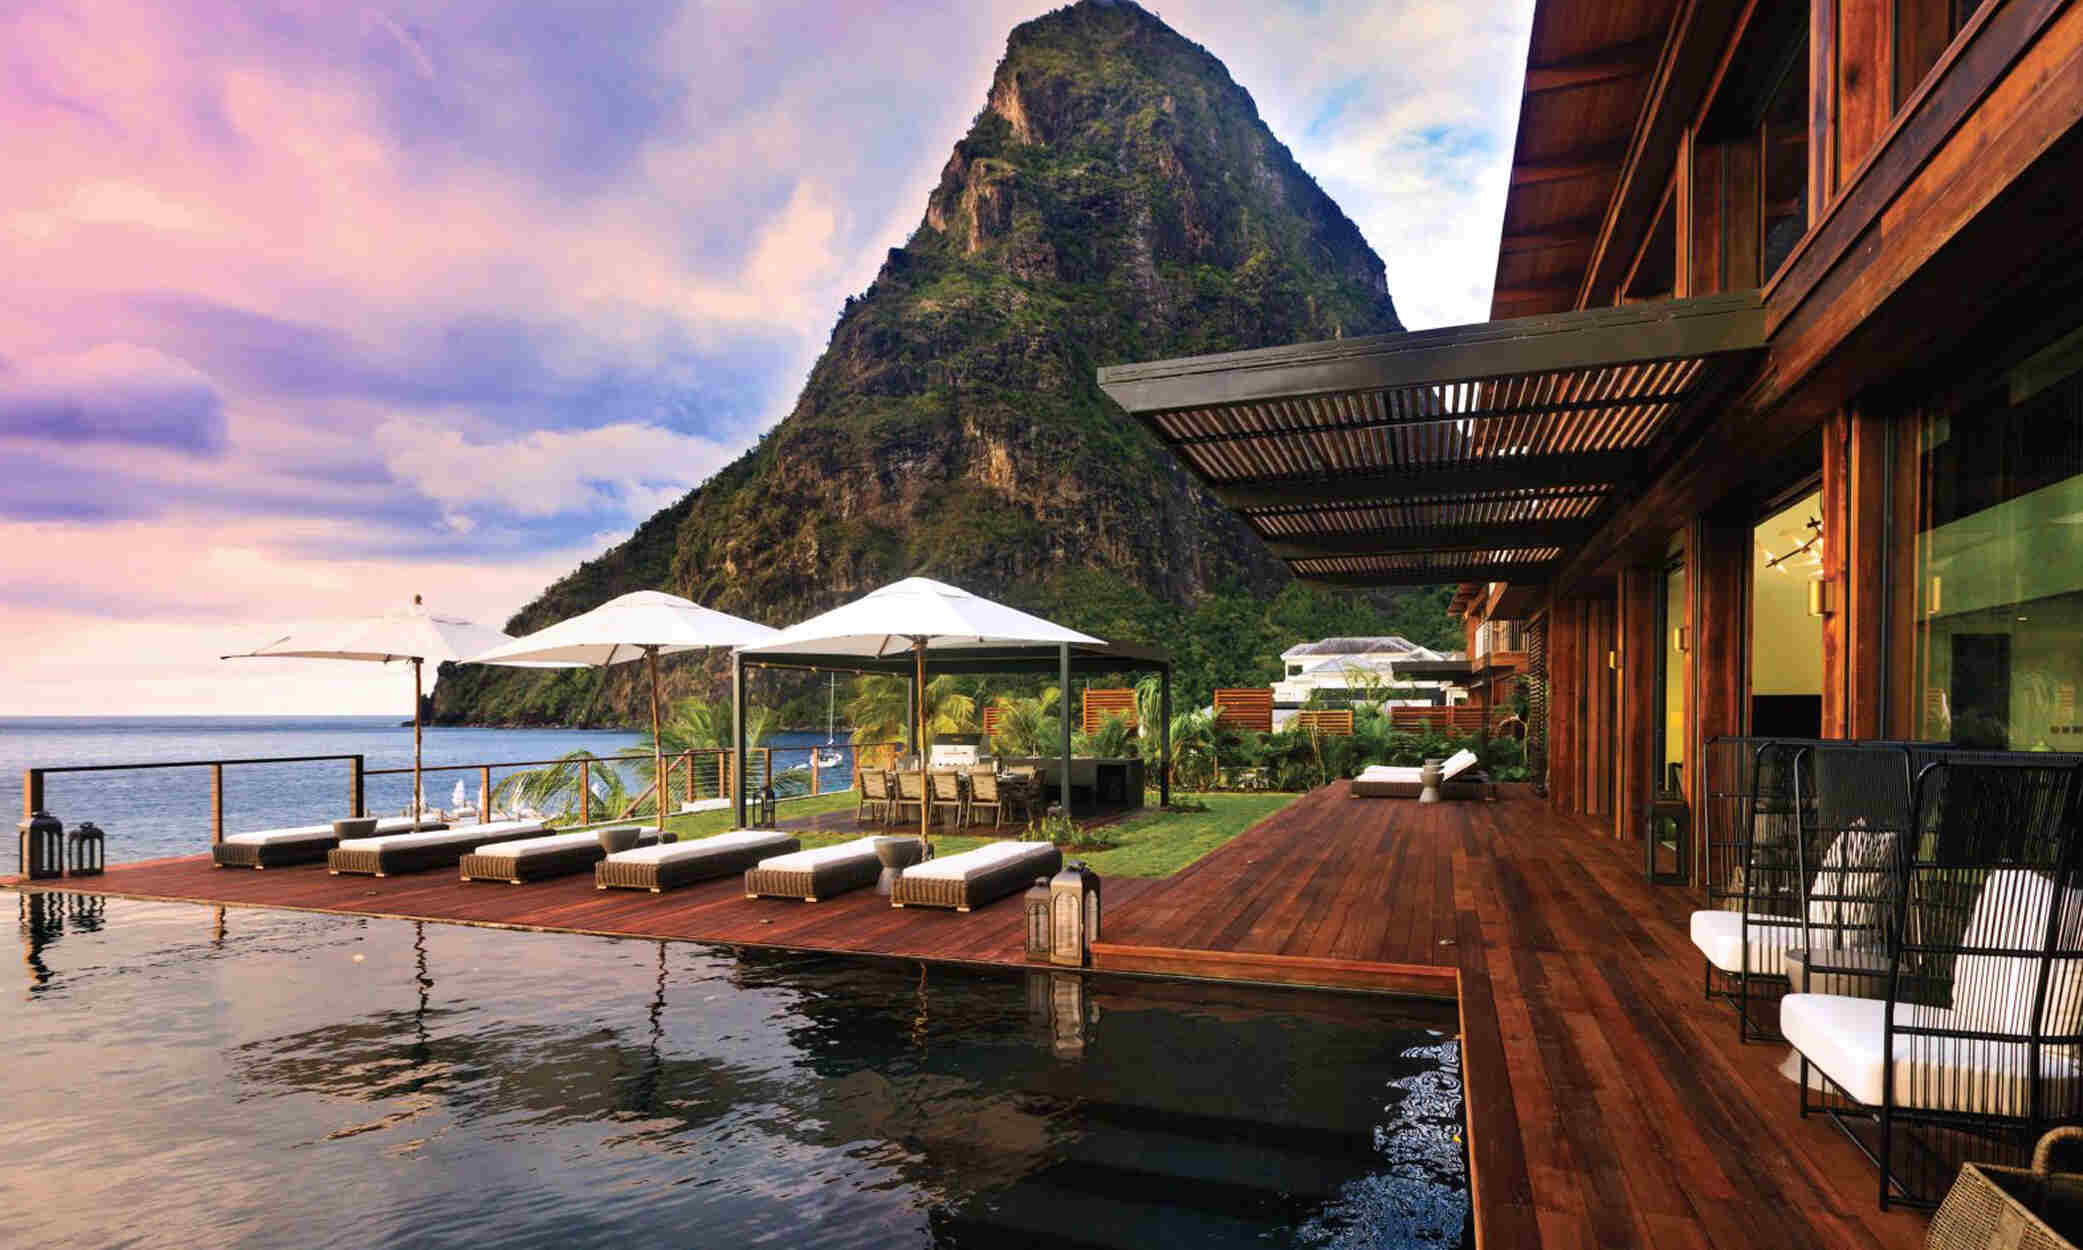 The leading luxury resorts in St Lucia include Sugar Beach.